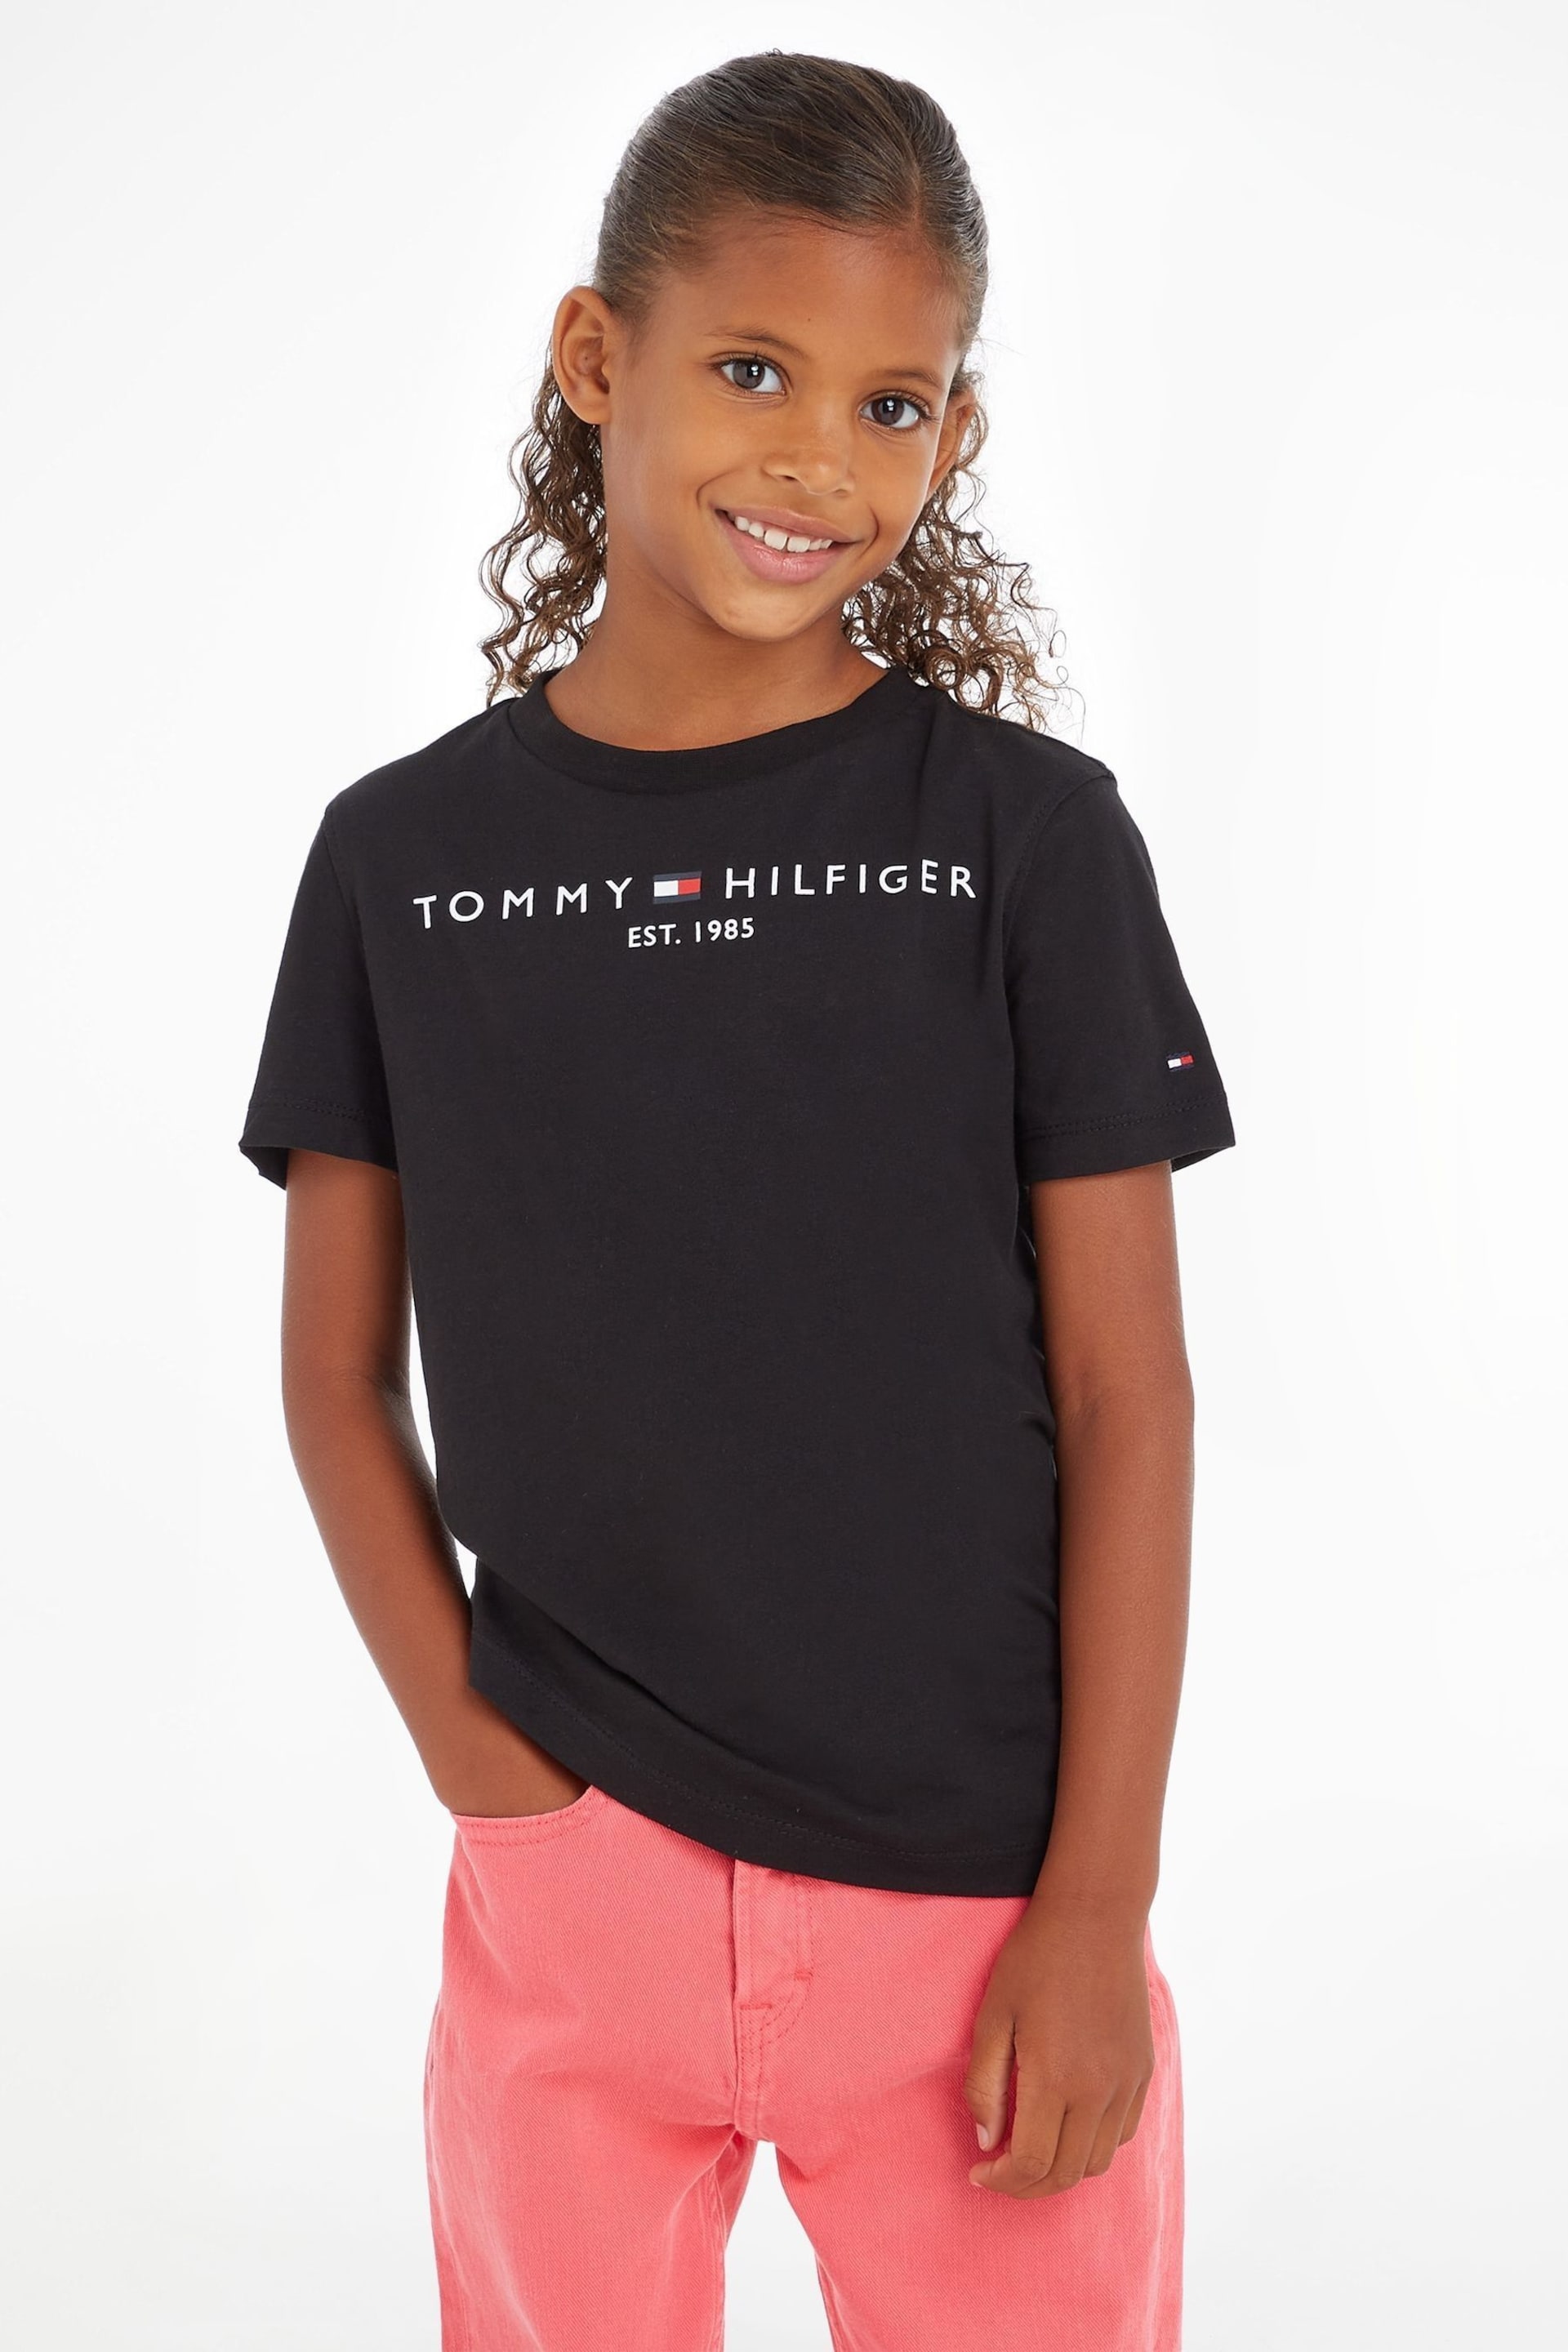 Tommy Hilfiger Essential T-Shirt - Image 1 of 3